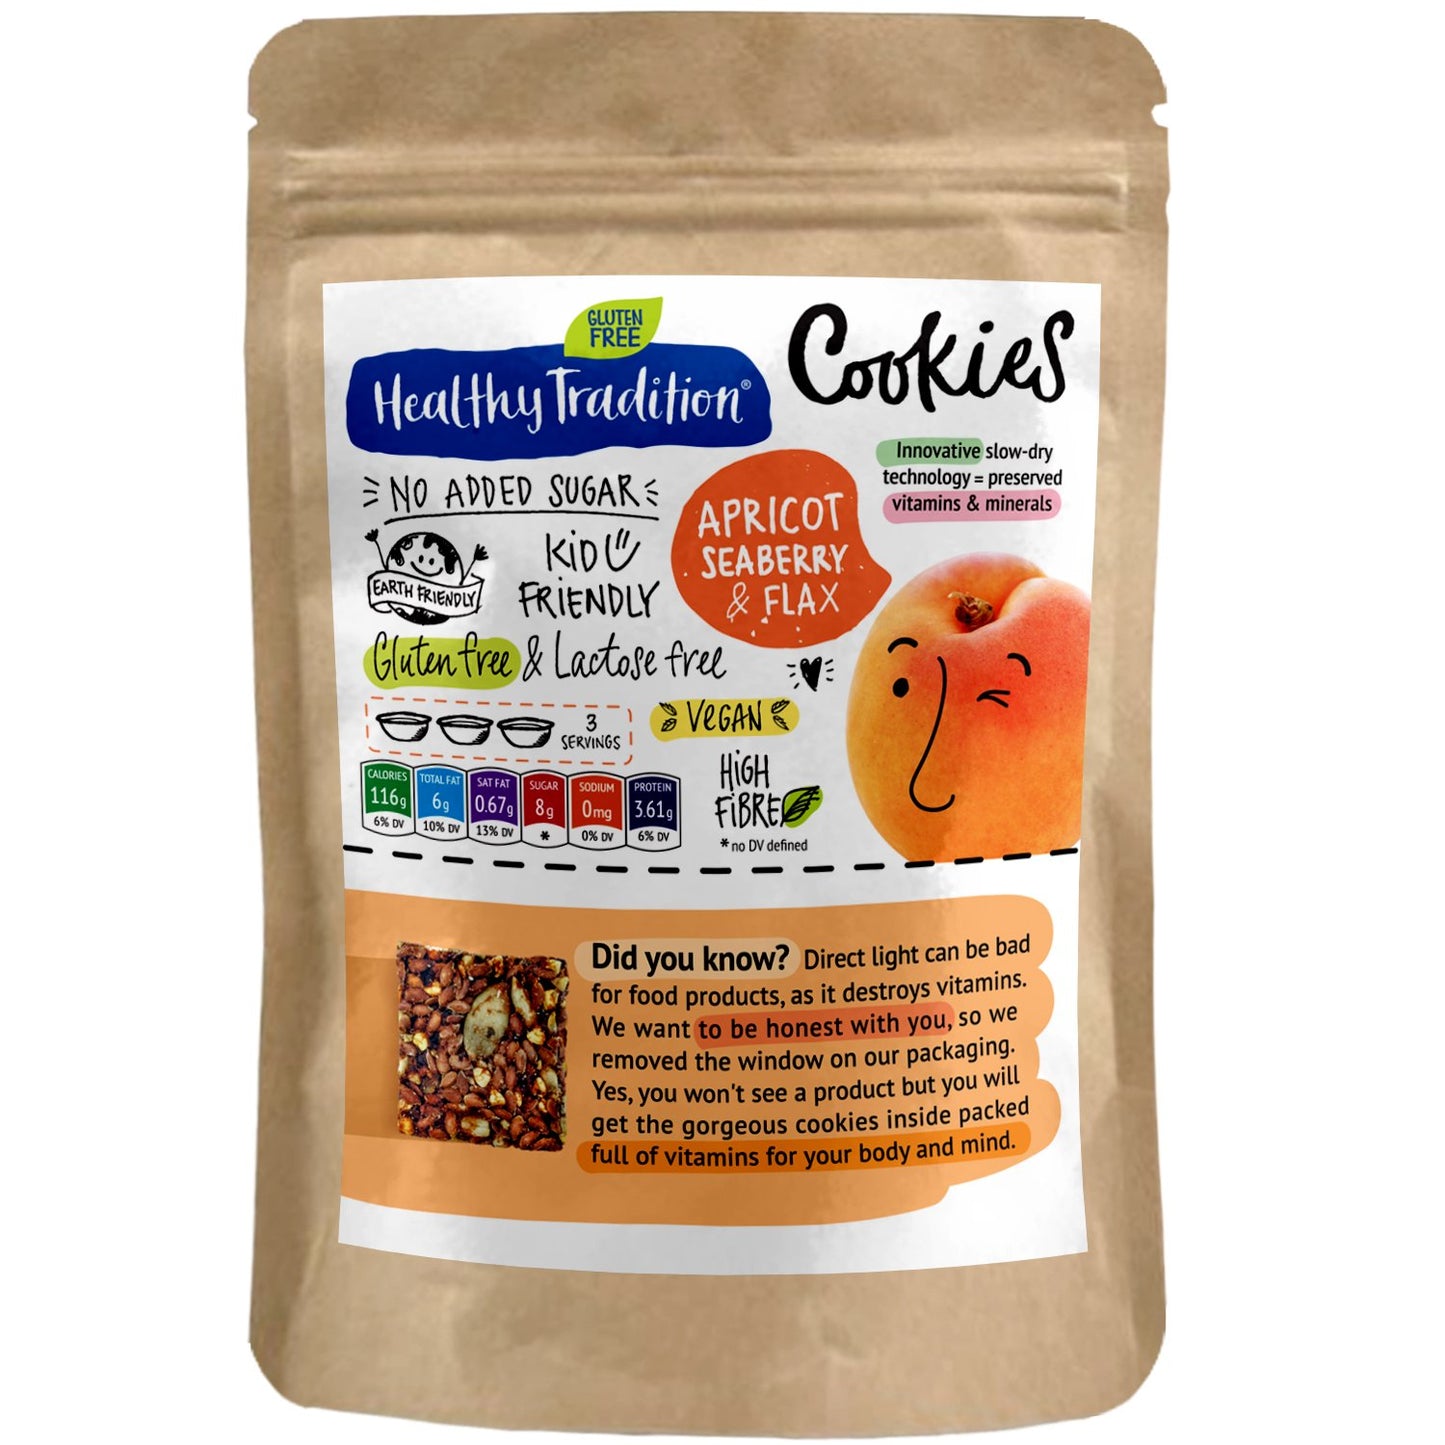 Dried cookies "Apricot and flax" gluten-free and sugar-free, 90g